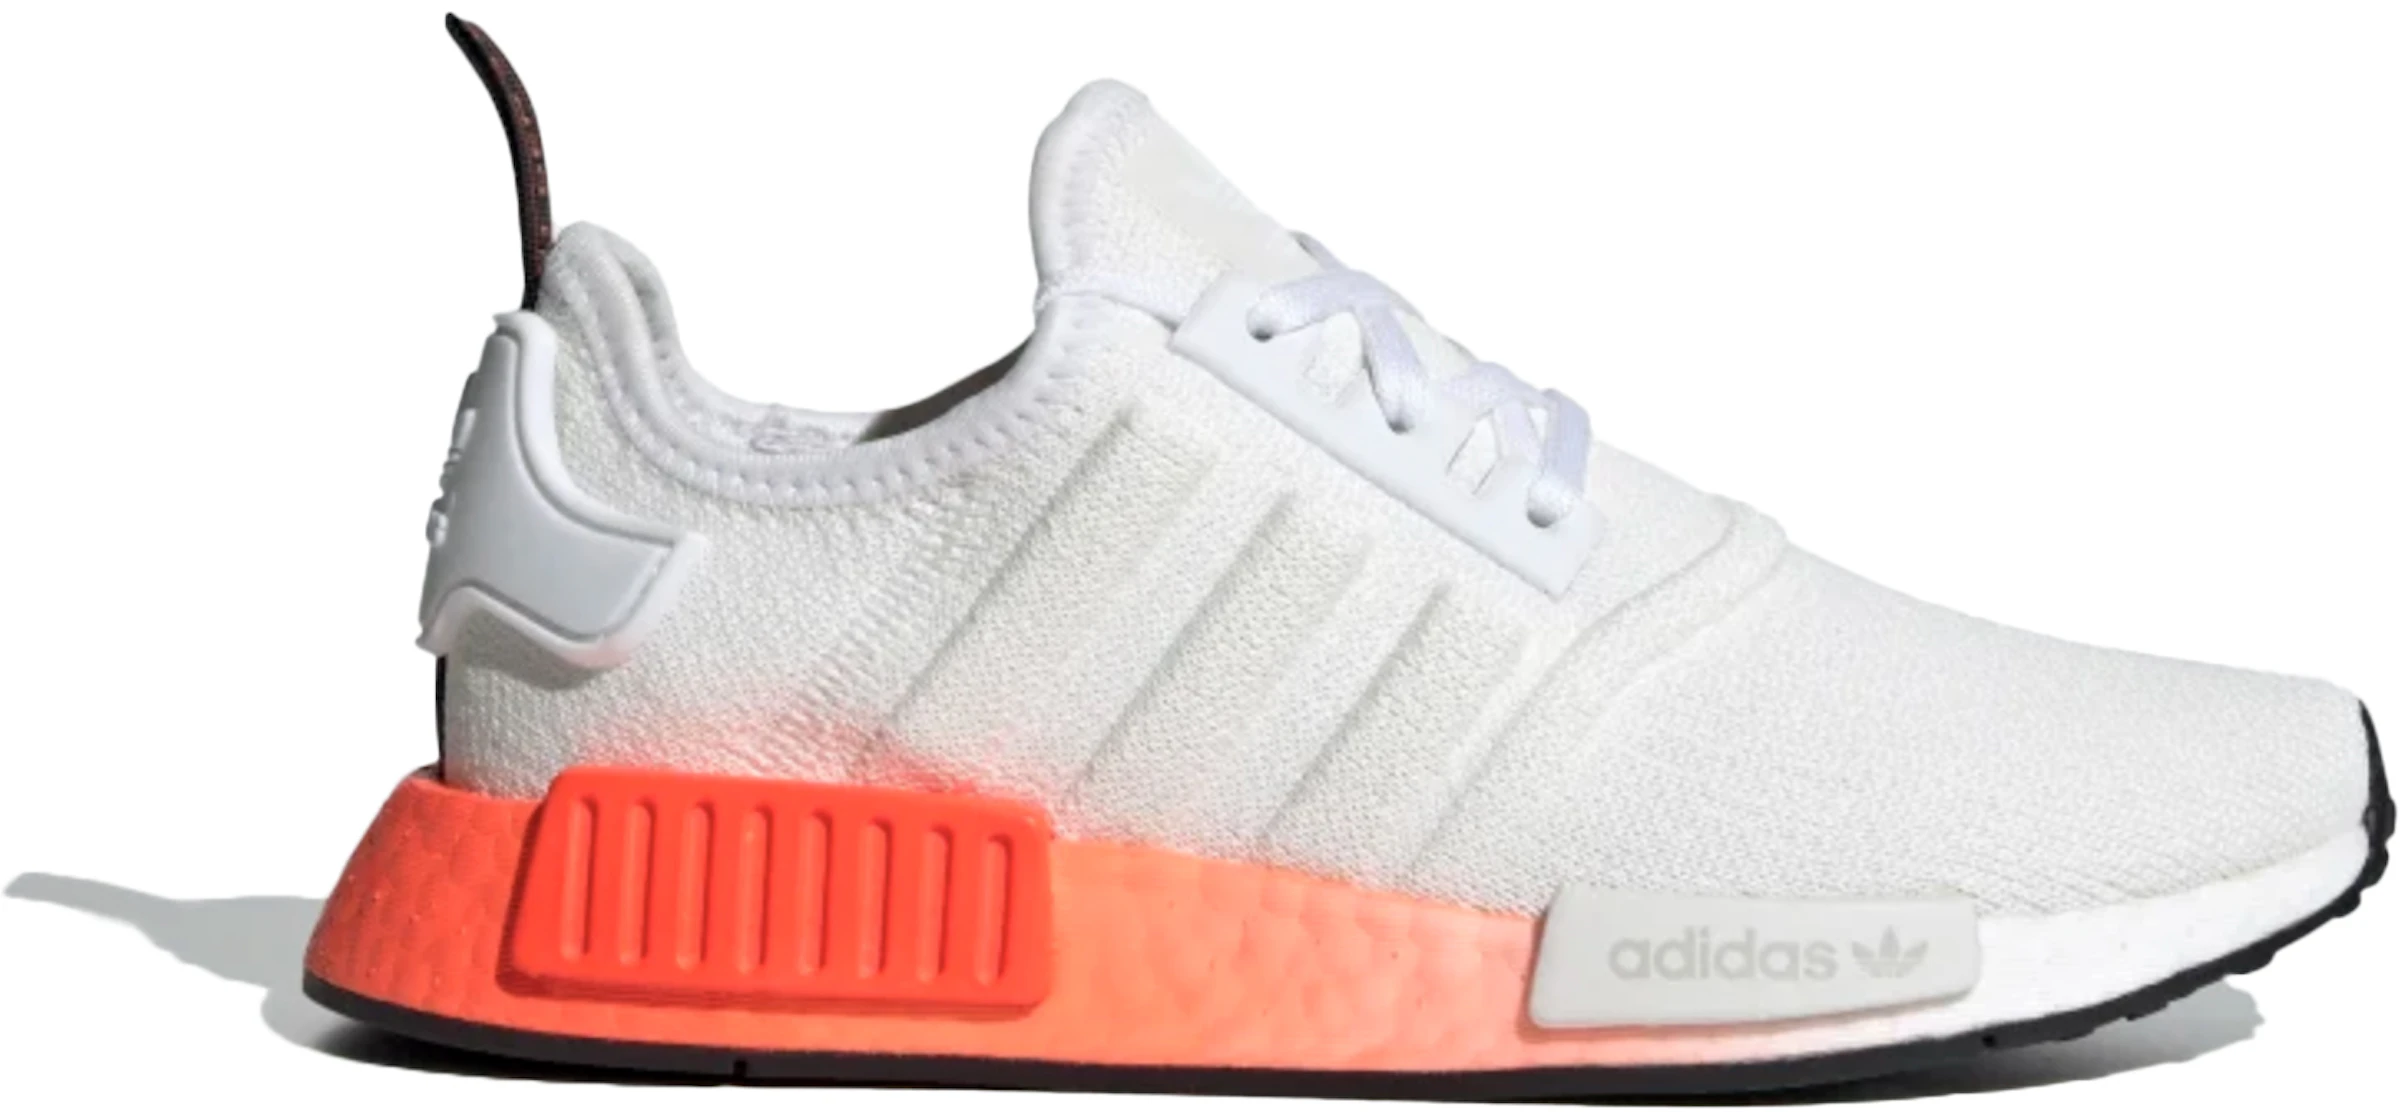 adidas NMD R1 White Solar Red (GS) US